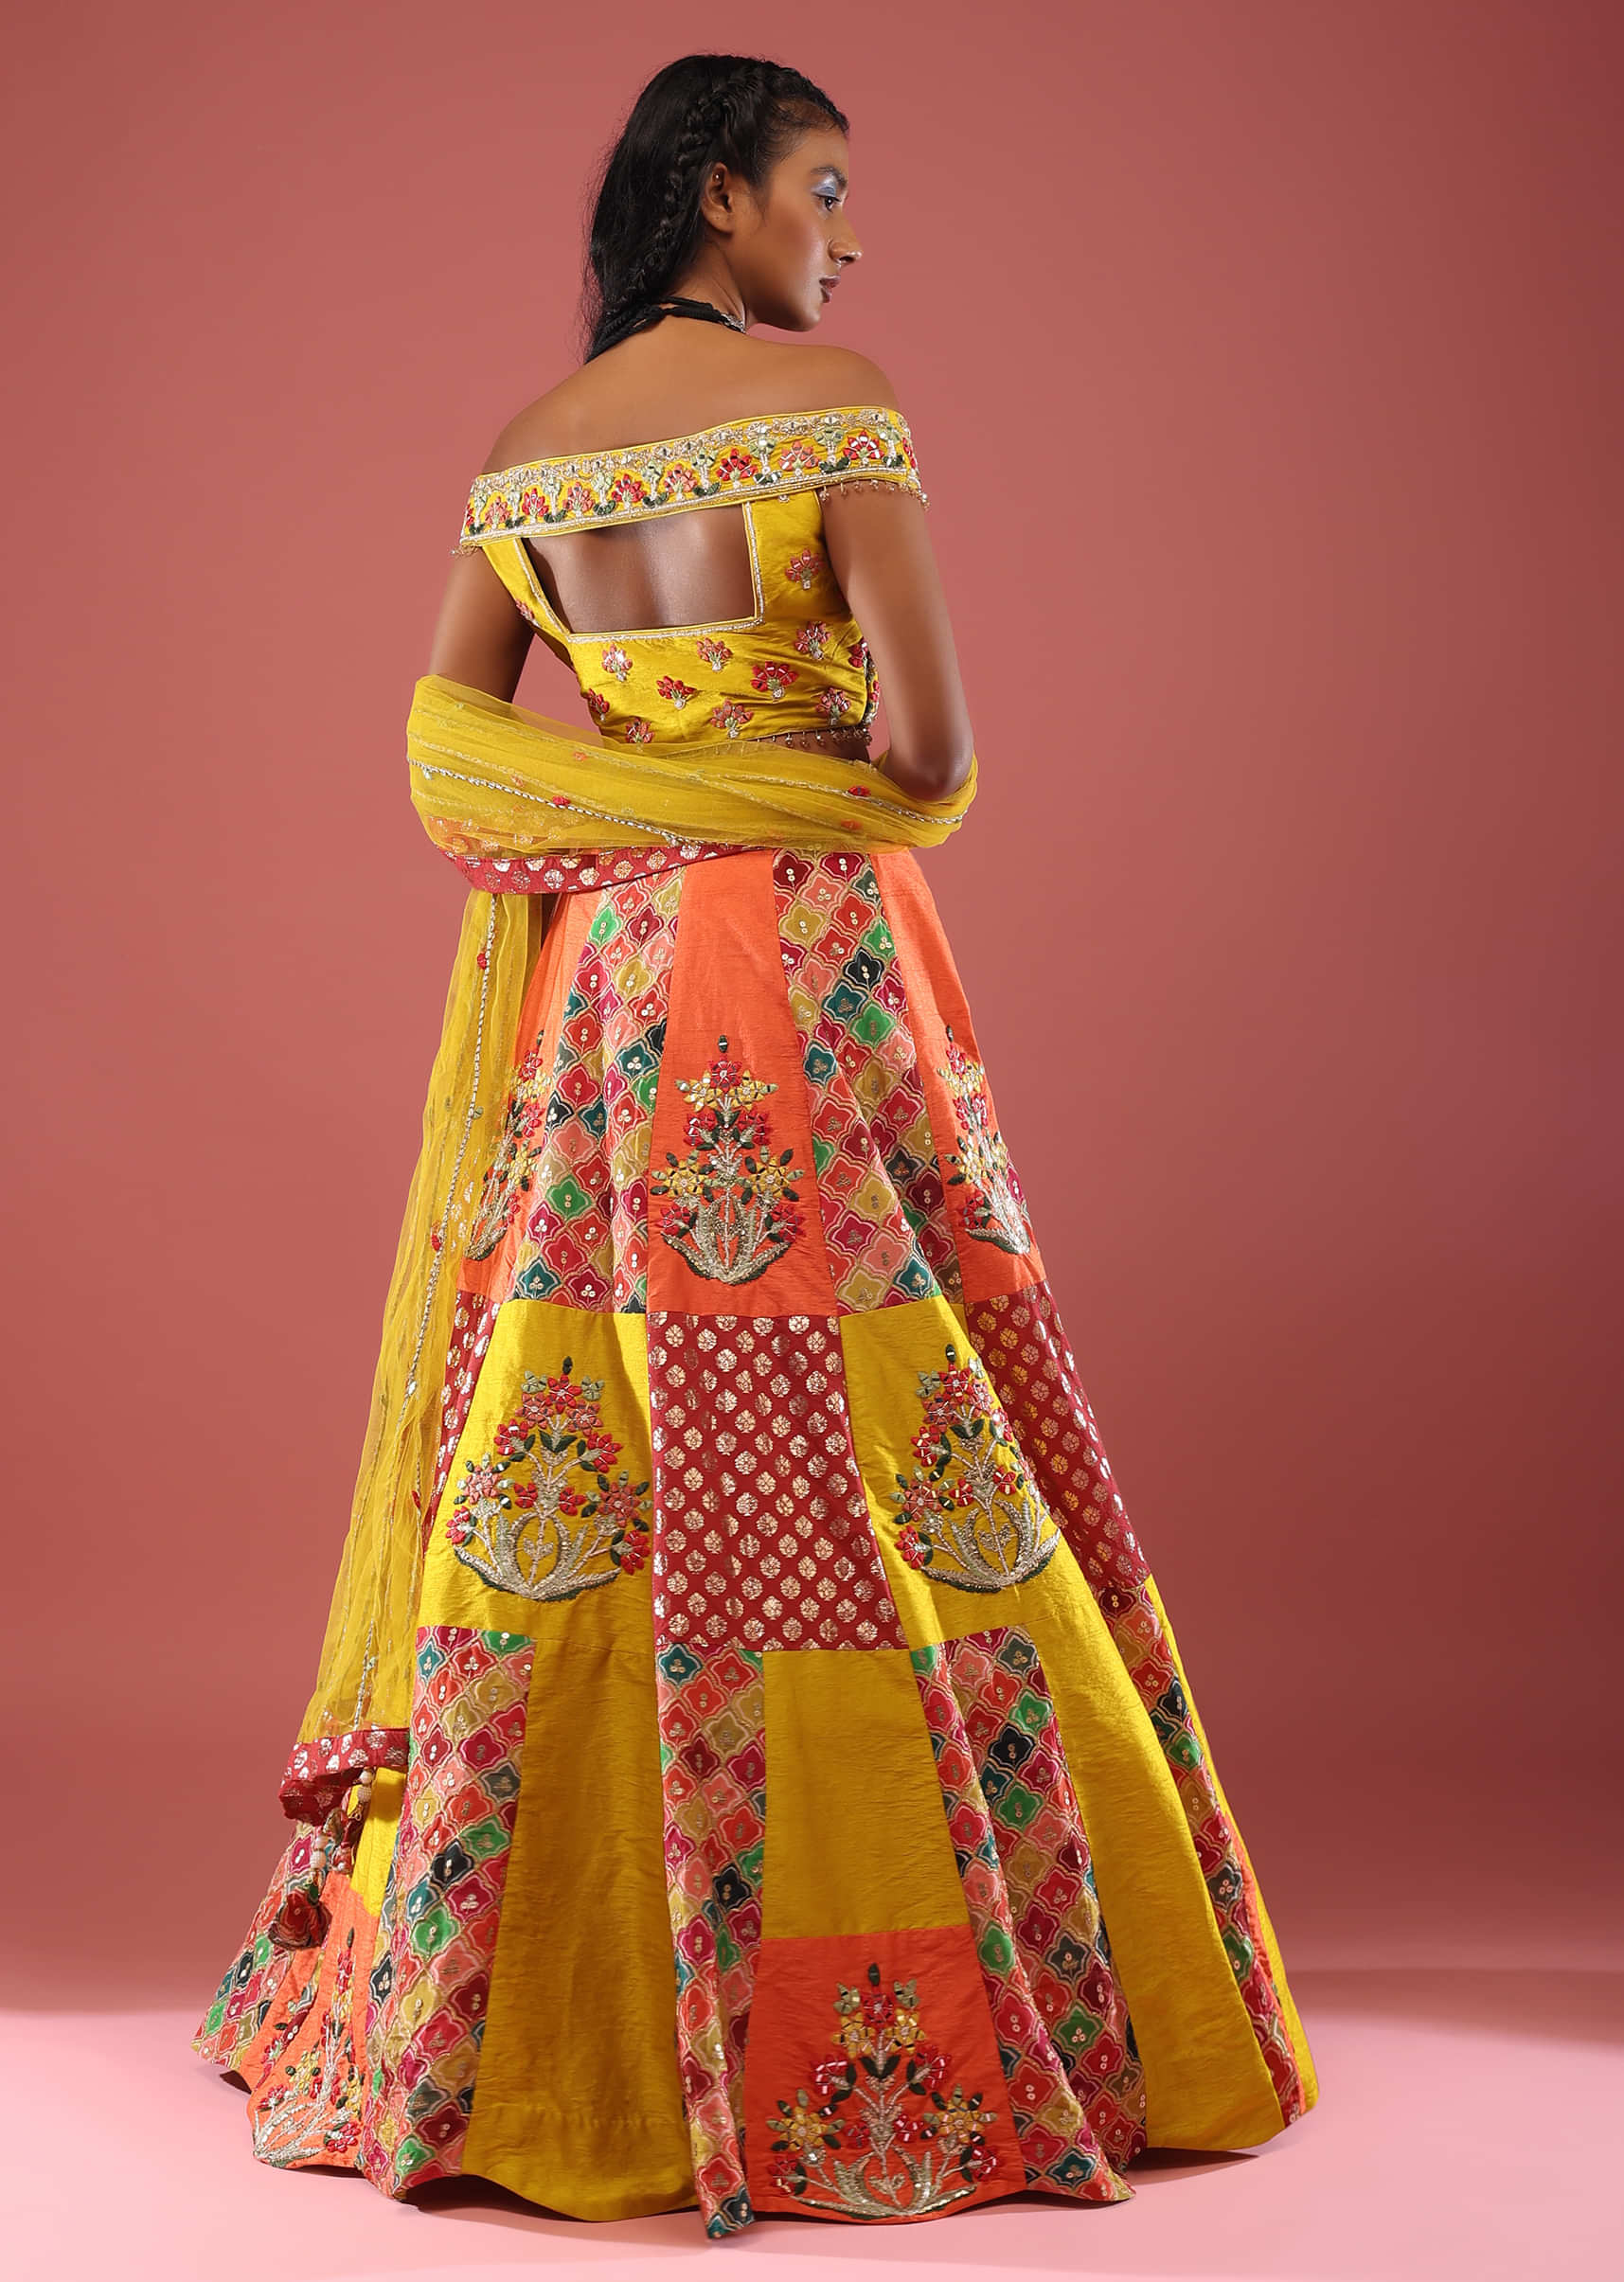 Cyber Yellow Lehenga Choli With Intricate Patchwork In Mirror Work, Brocade Weave And Moroccan Print